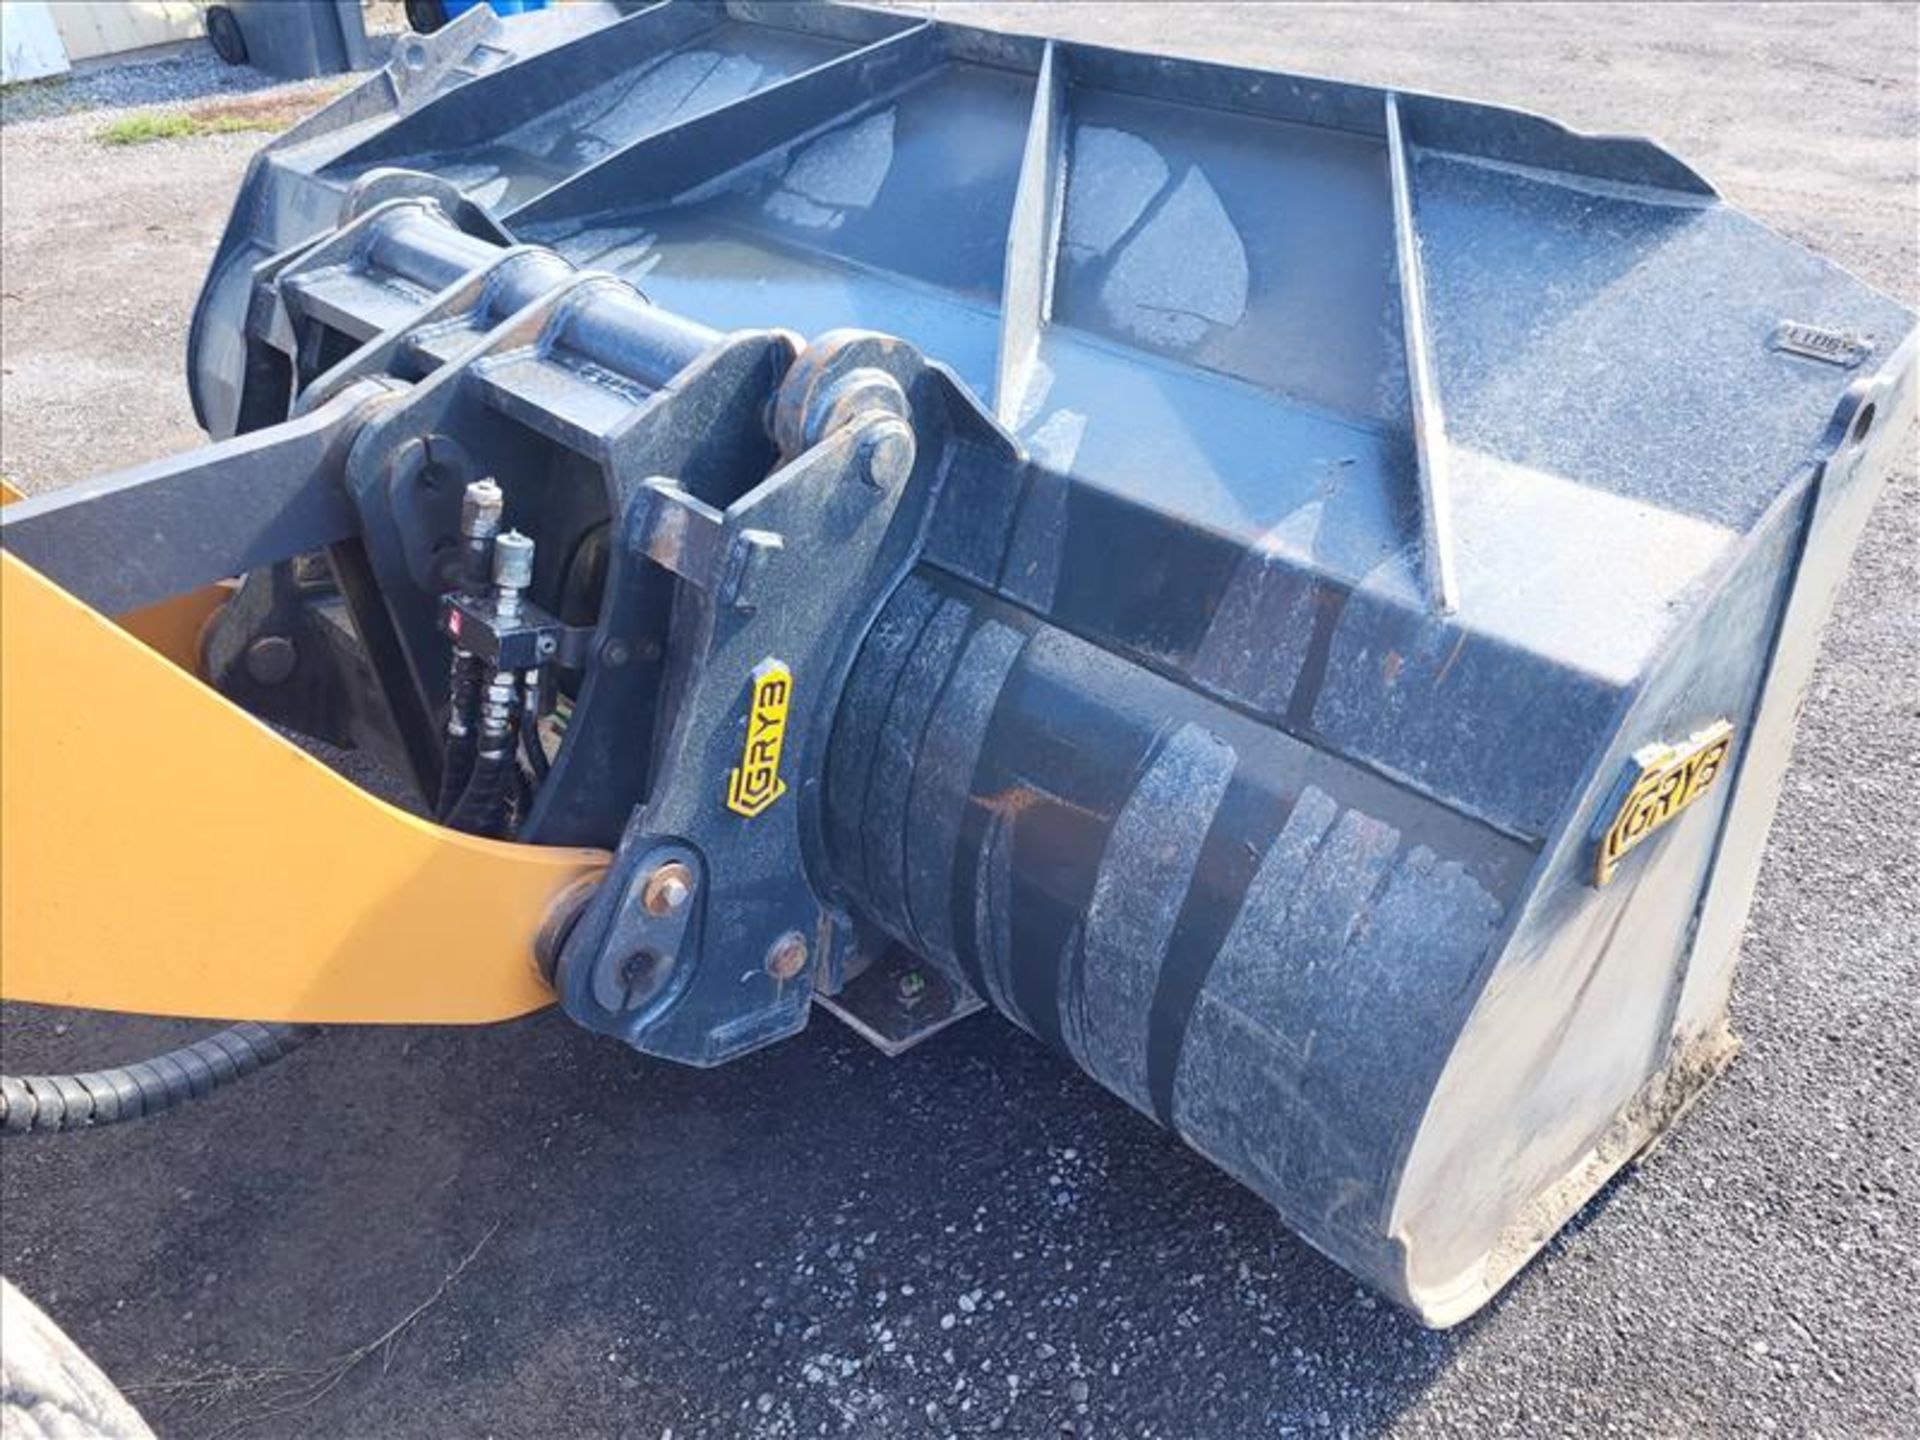 Case 621G Wheel Loader, enclosed cab, auxiliairy hydraulic system, GRYB Q/C, rearview camera, - Image 11 of 20